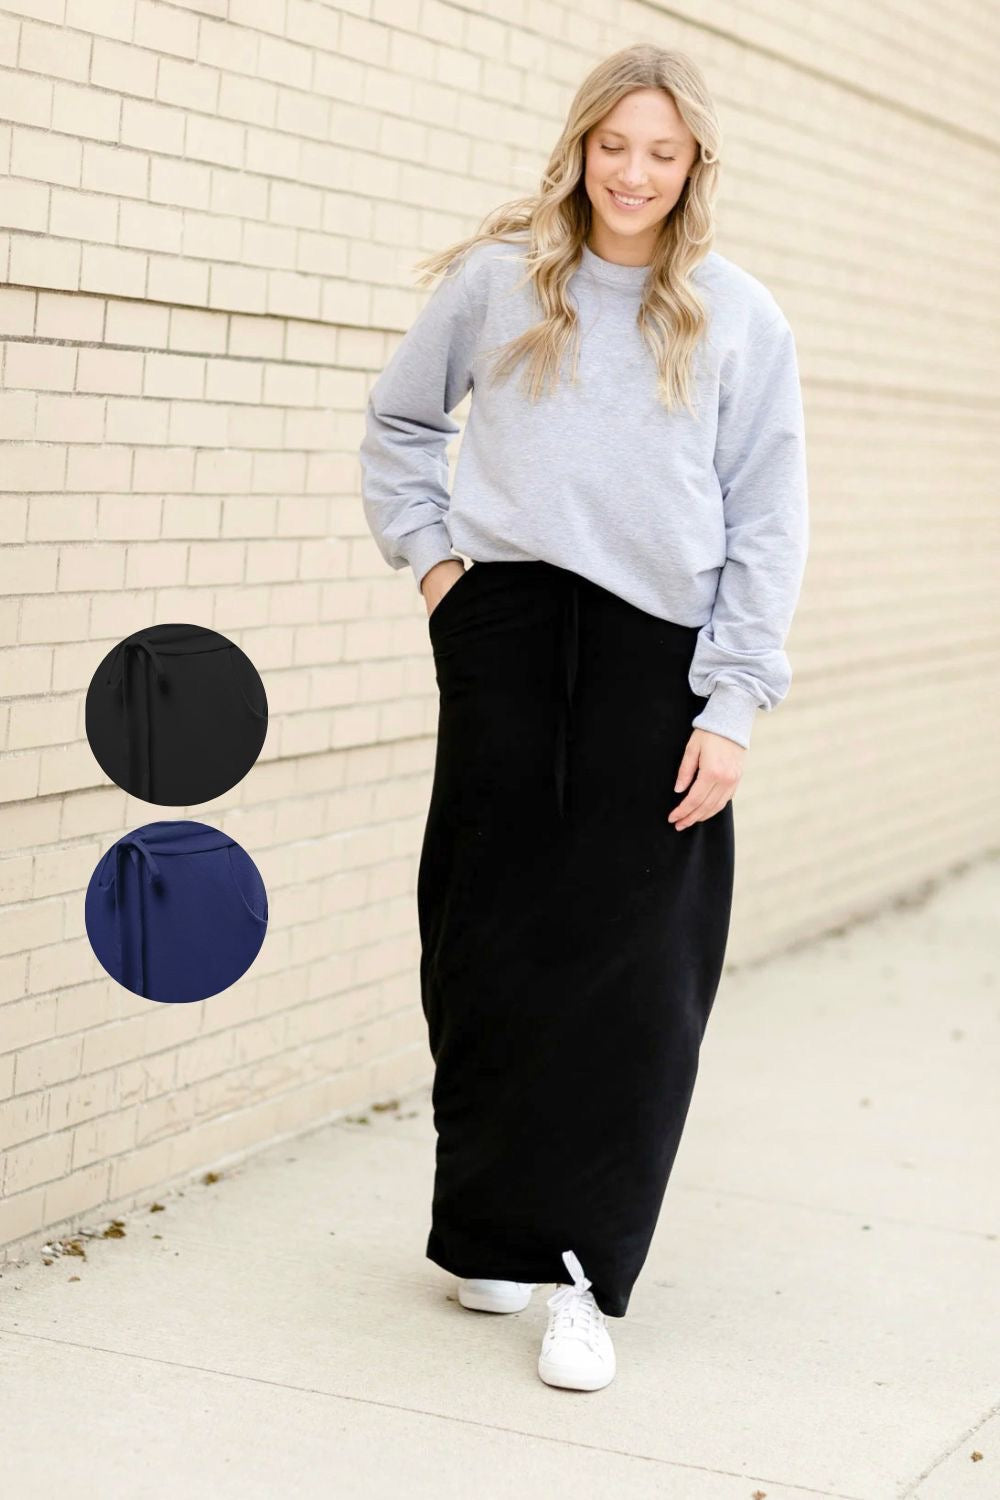 Womens Apparel Clothing maxi skirt full length available in solid black or solid navy blue all sizes Small Medium Large XL 1XL 2XL 3XL